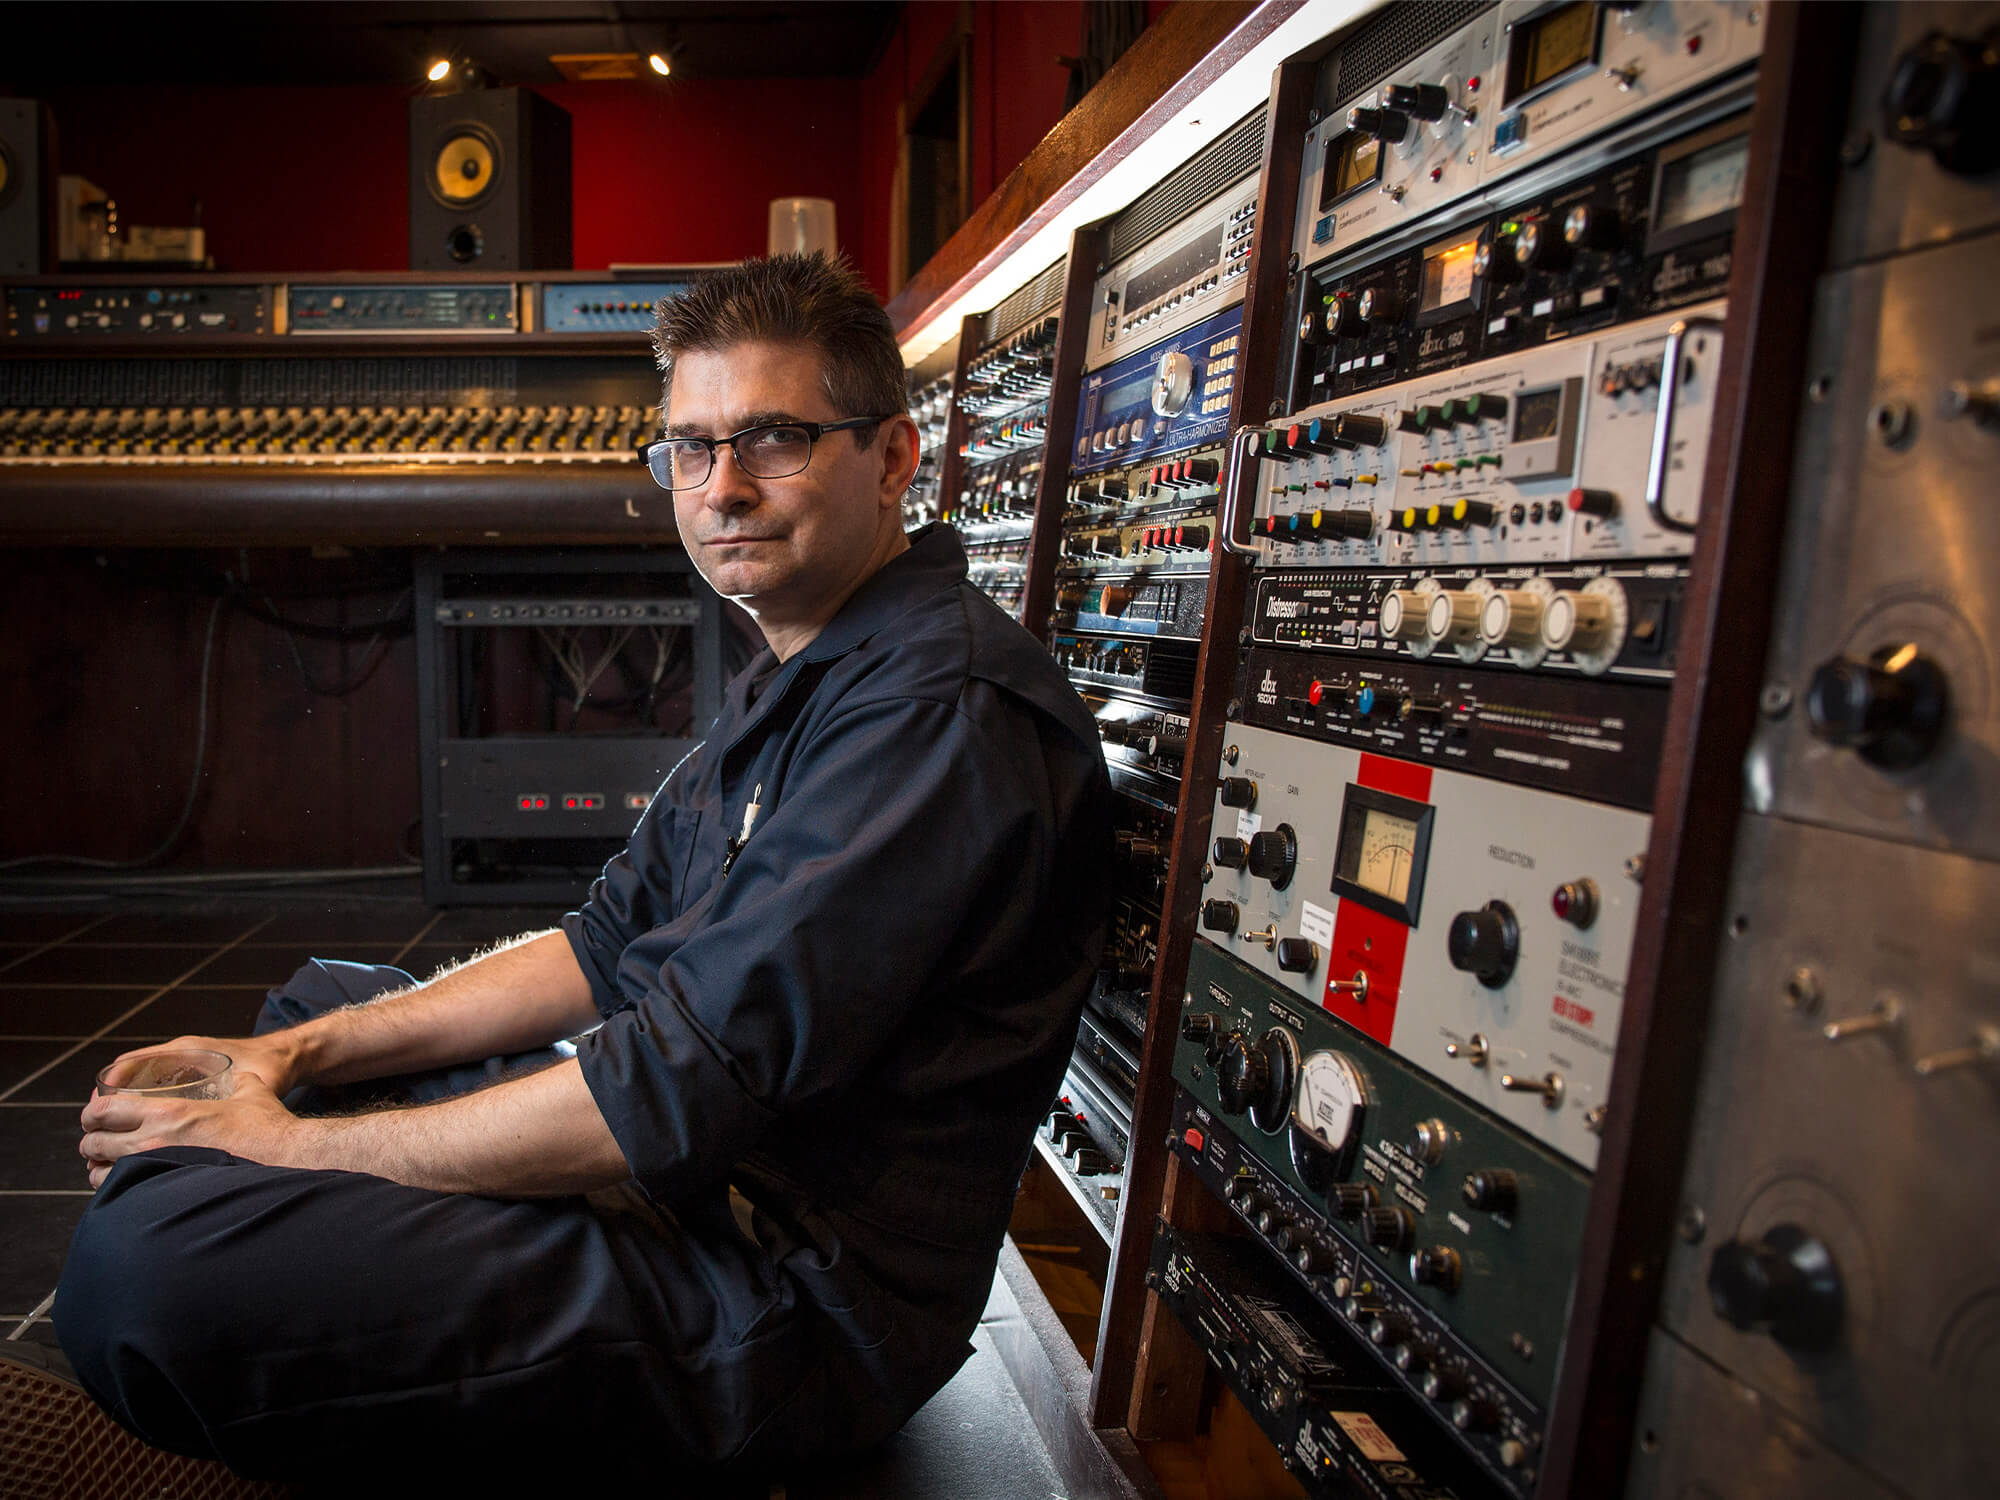 Steve Albini sat in a studio, leaning his back against music gear